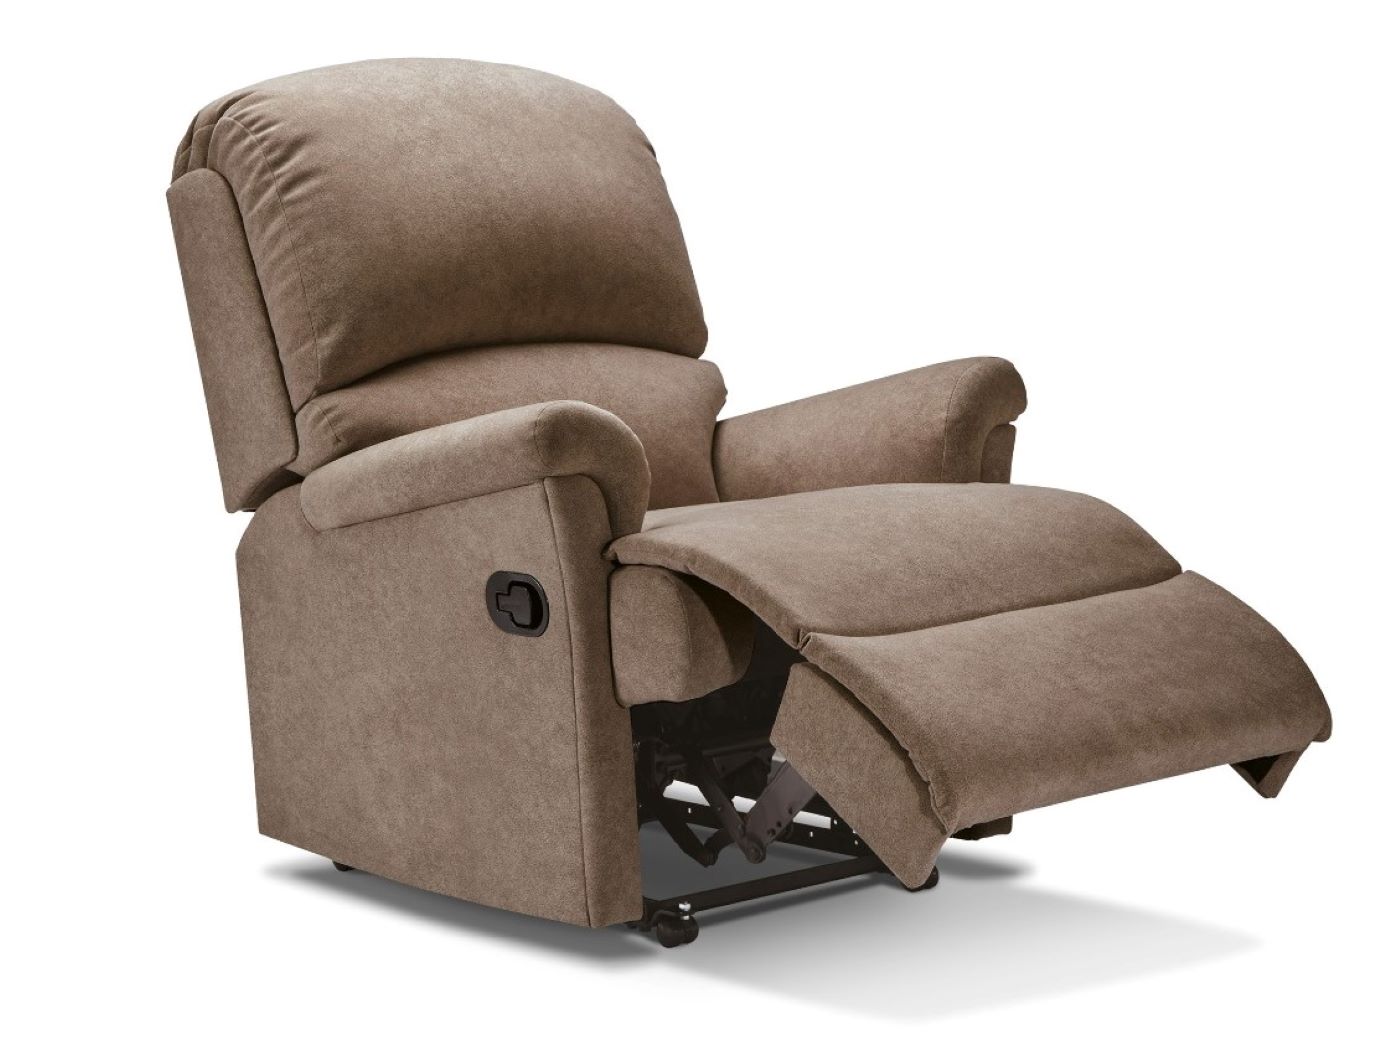 napoli recliner chair